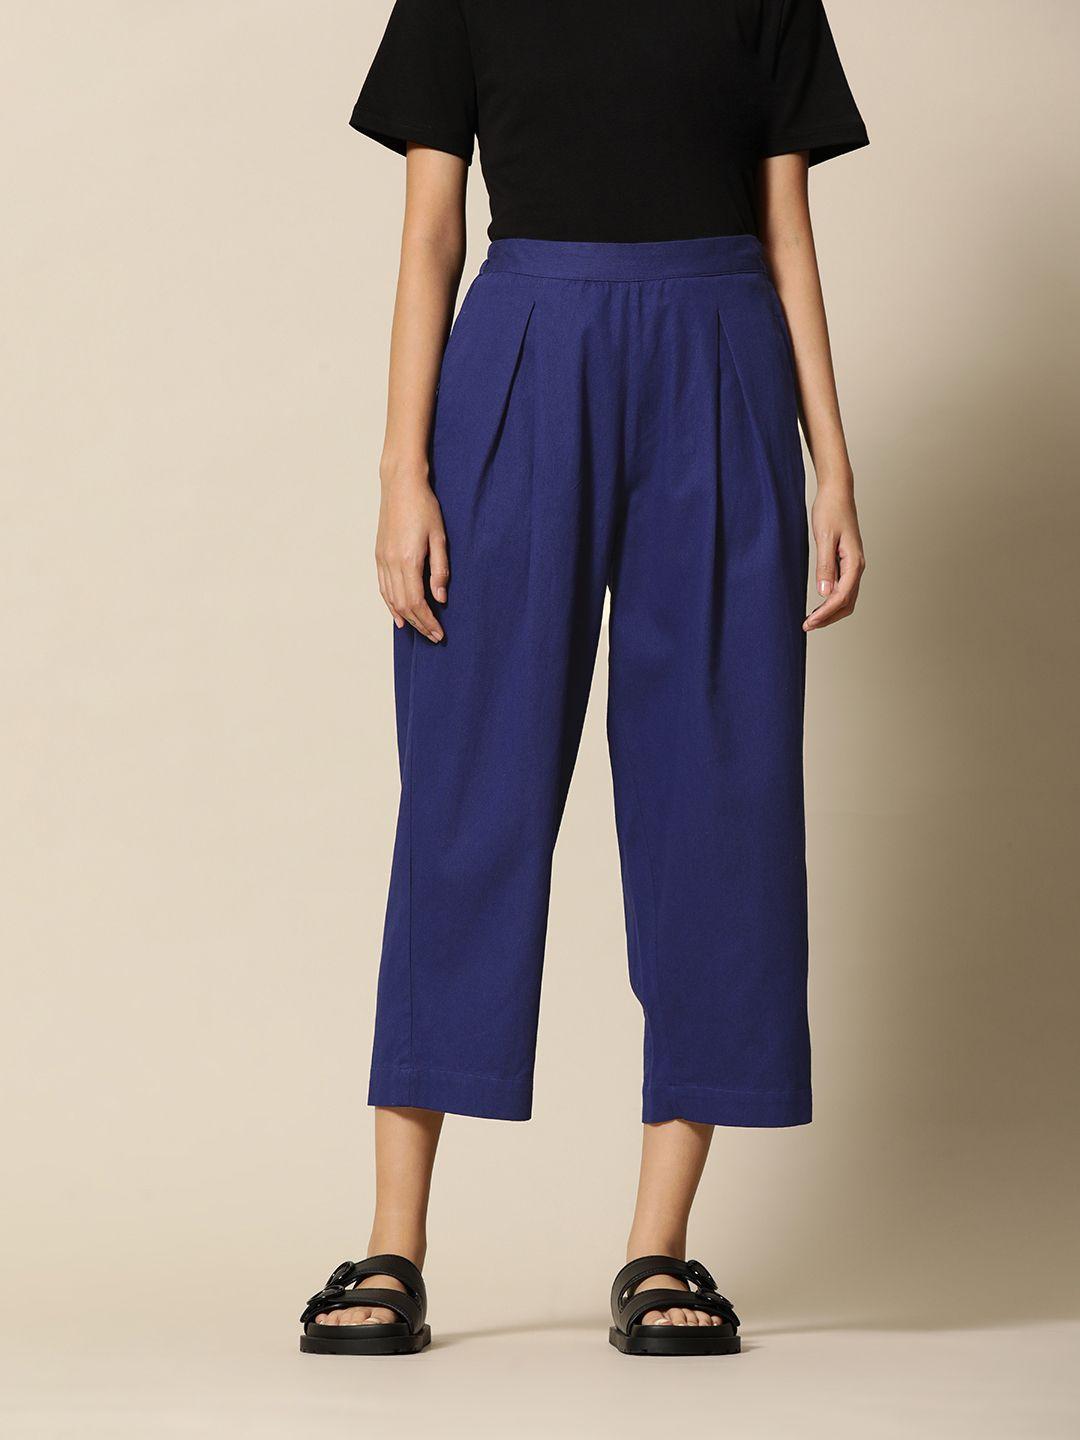 bower women navy blue solid premium cotton twill relaxed cropped trousers